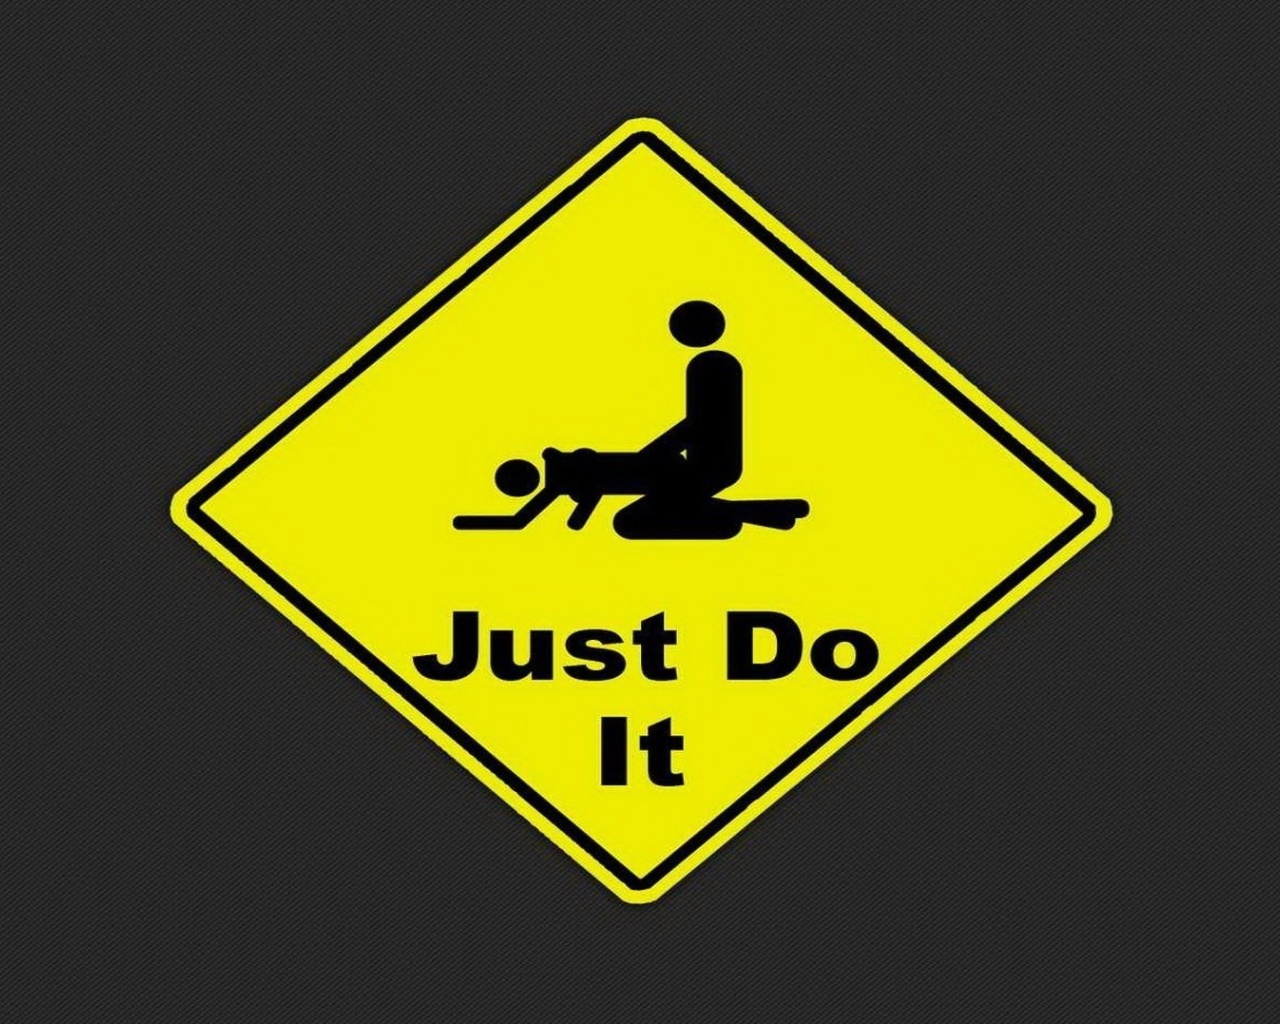 Das Just Do It Funny Sign Wallpaper 1280x1024